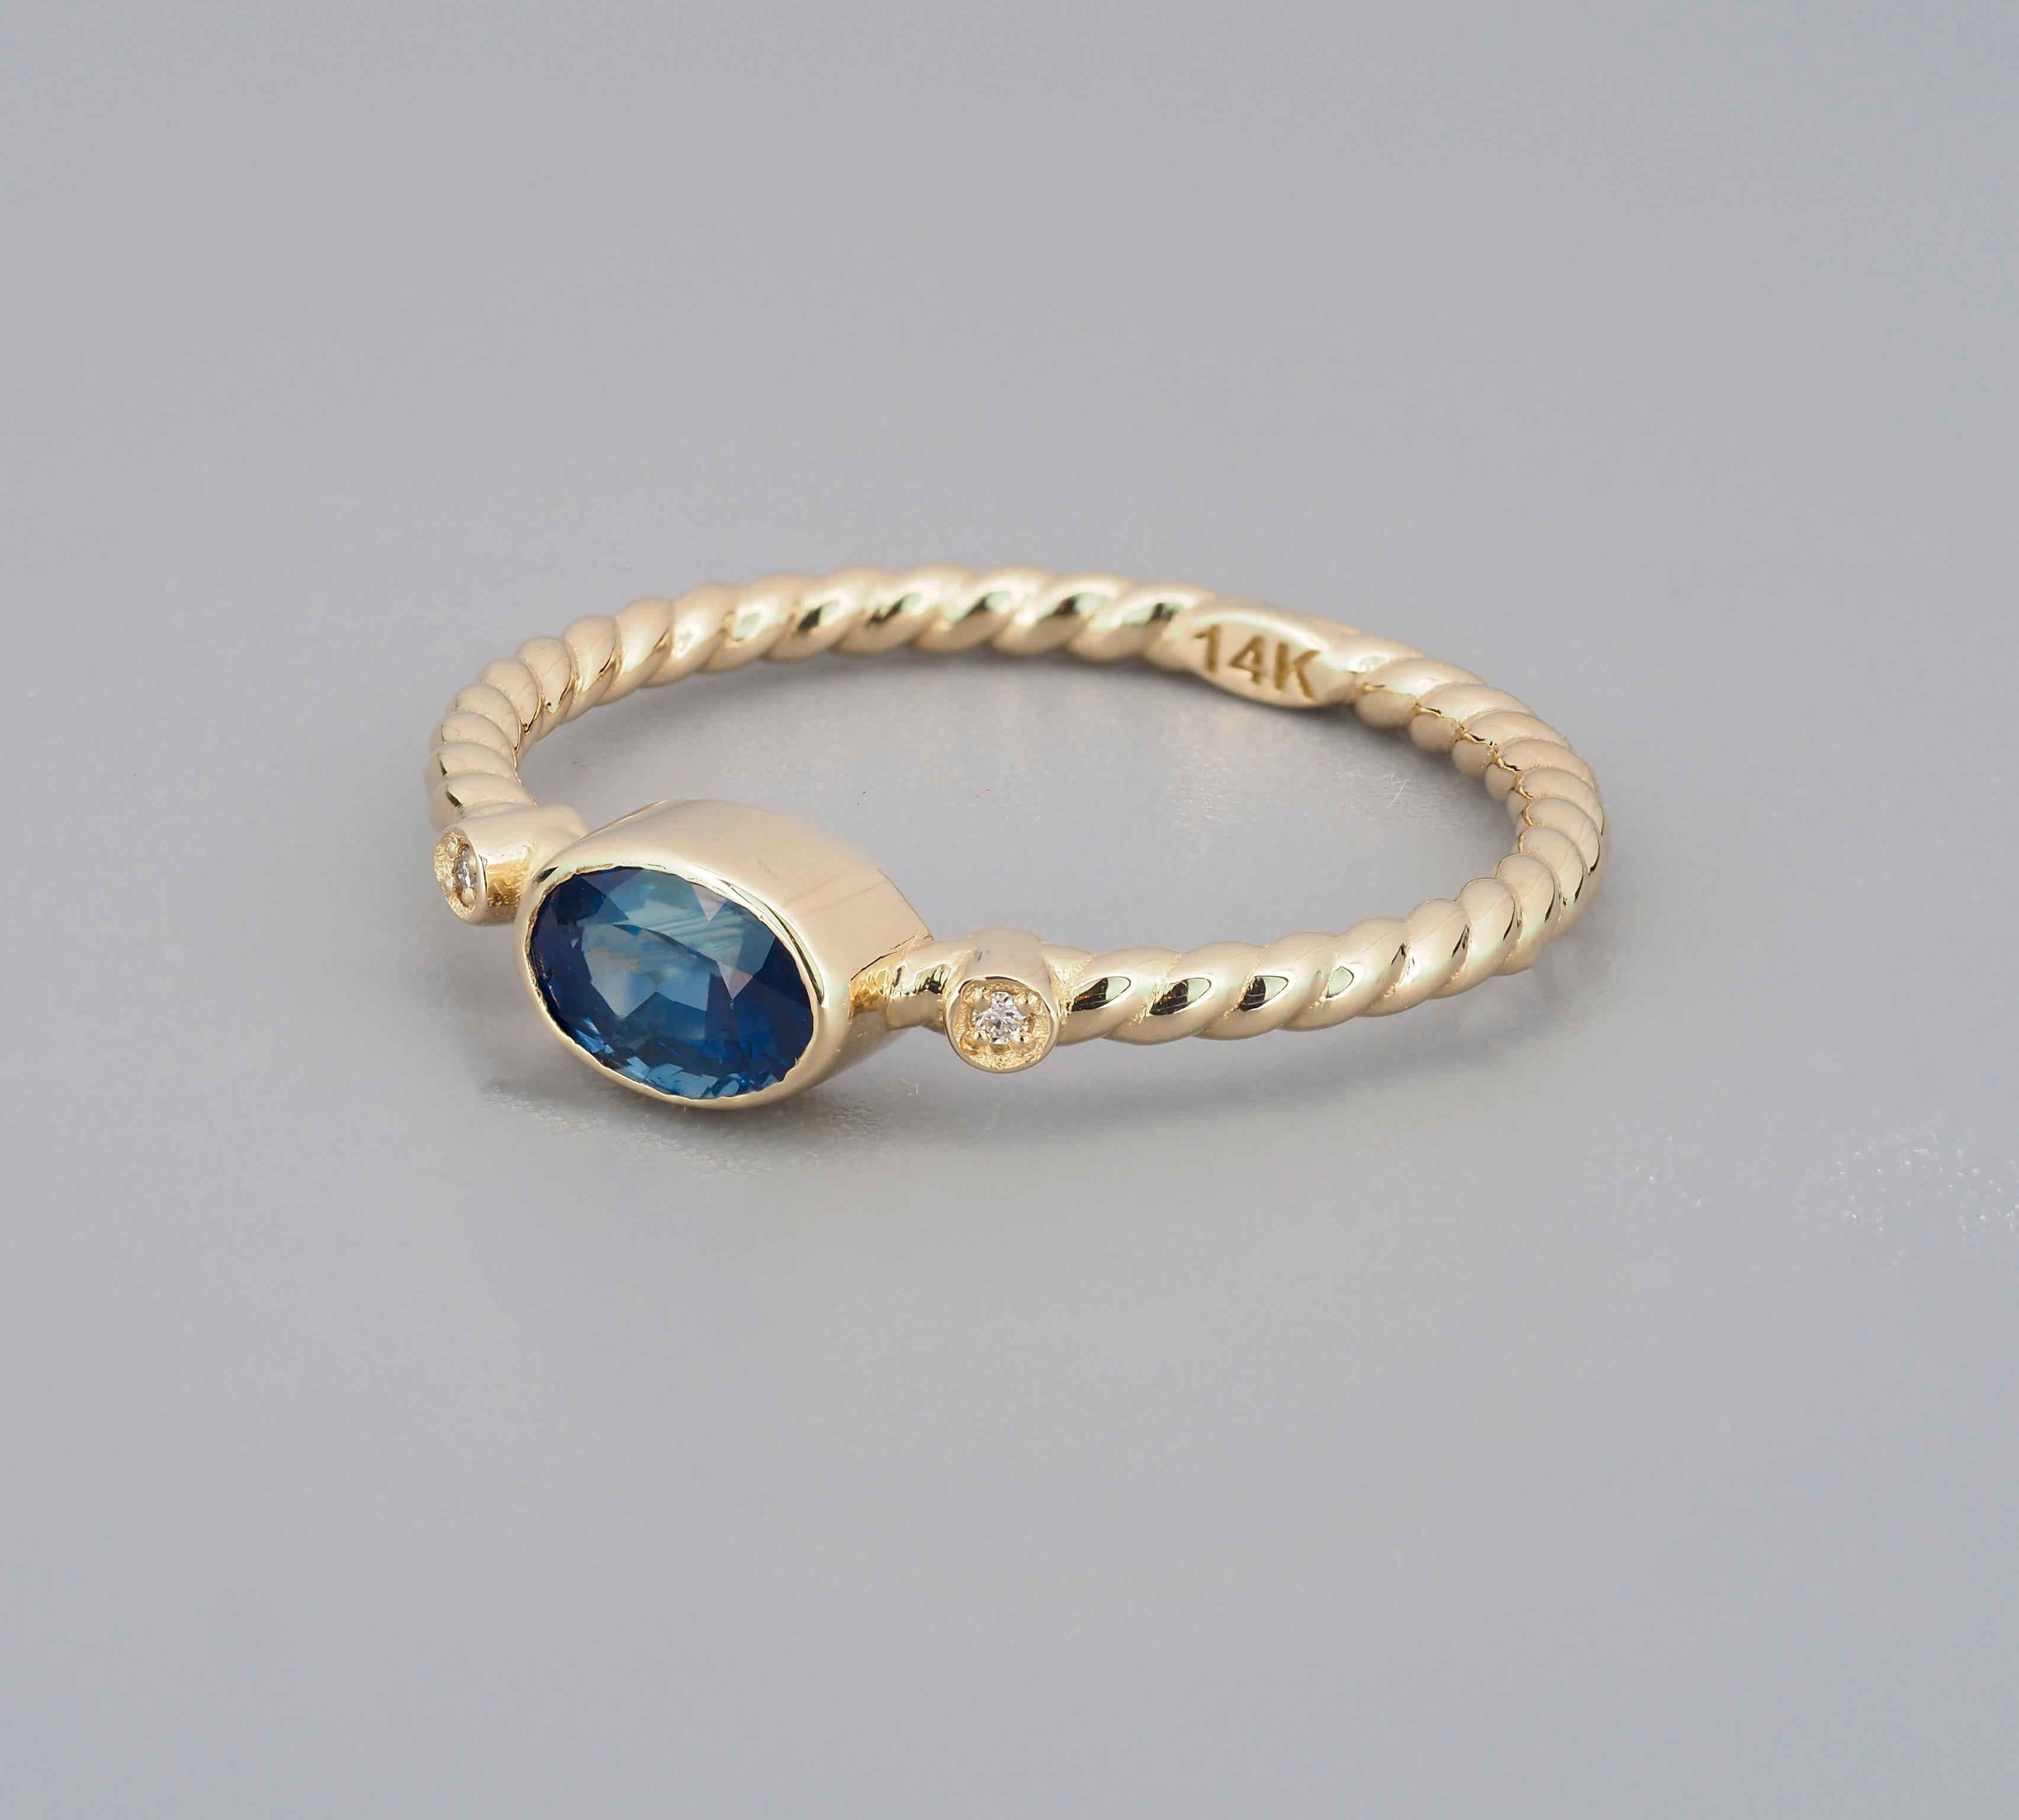 Oval Cut Blue Sapphire Ring in 14k Gold